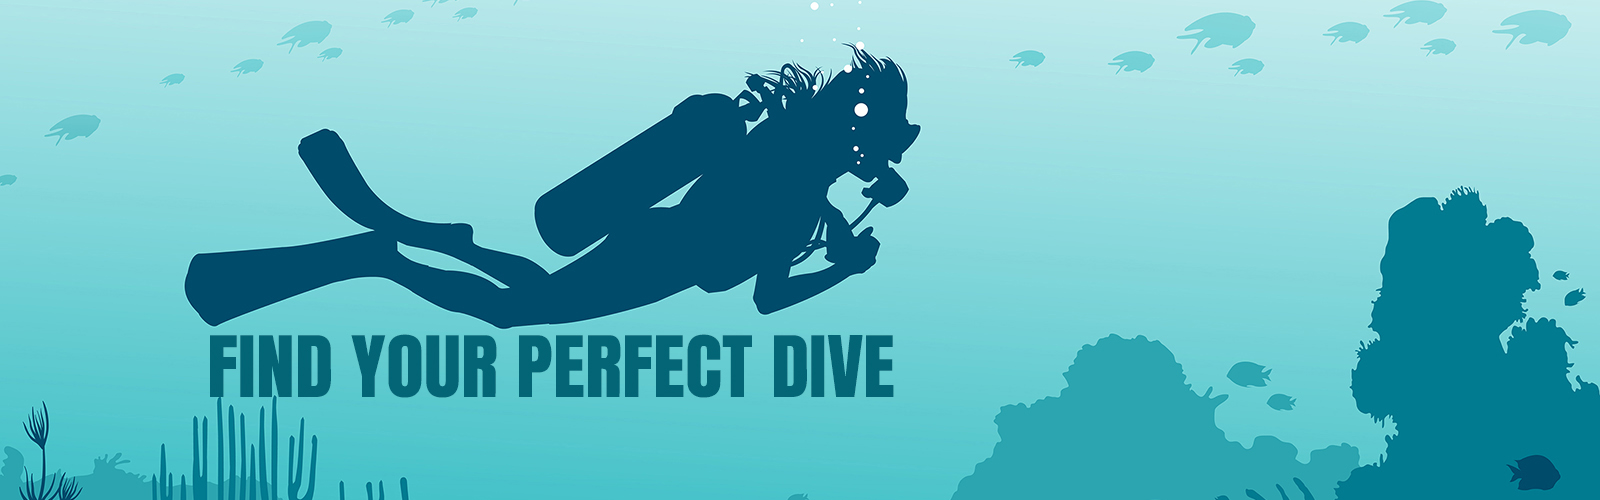 Divepricer, Find your perfect dive